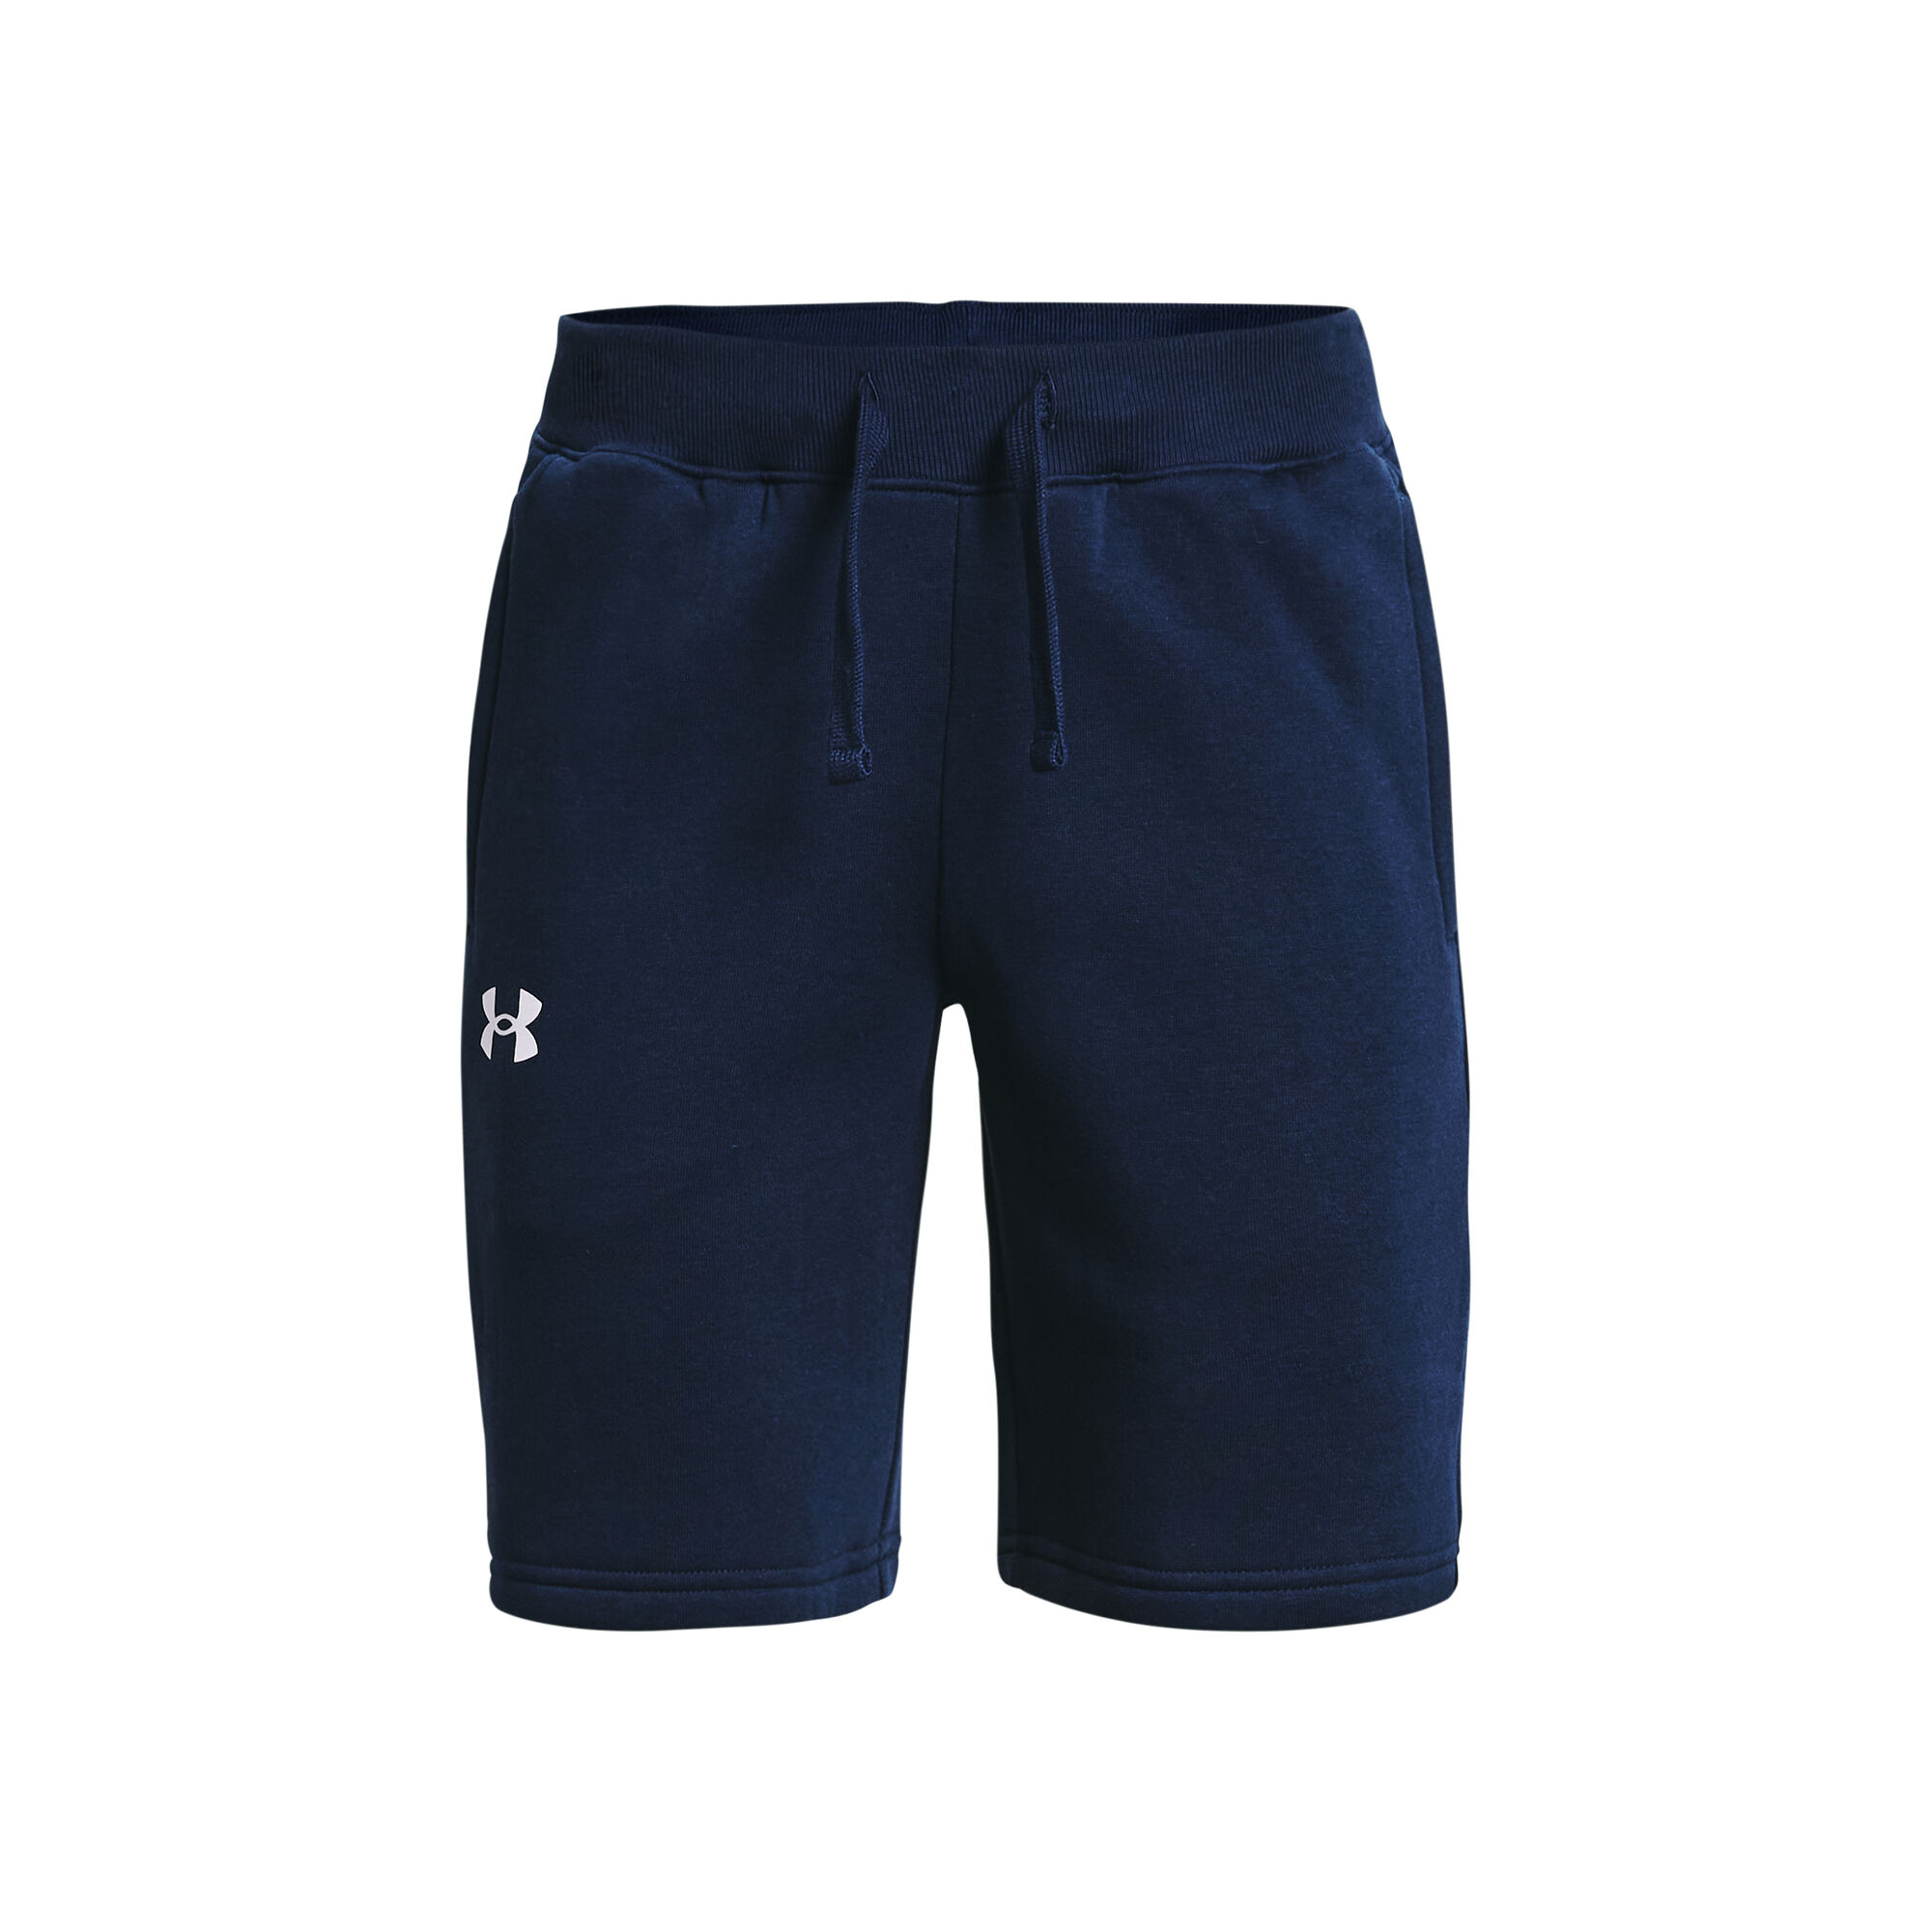 Under Armour Mens Shorts : Buy Online at Best Price in KSA - Souq